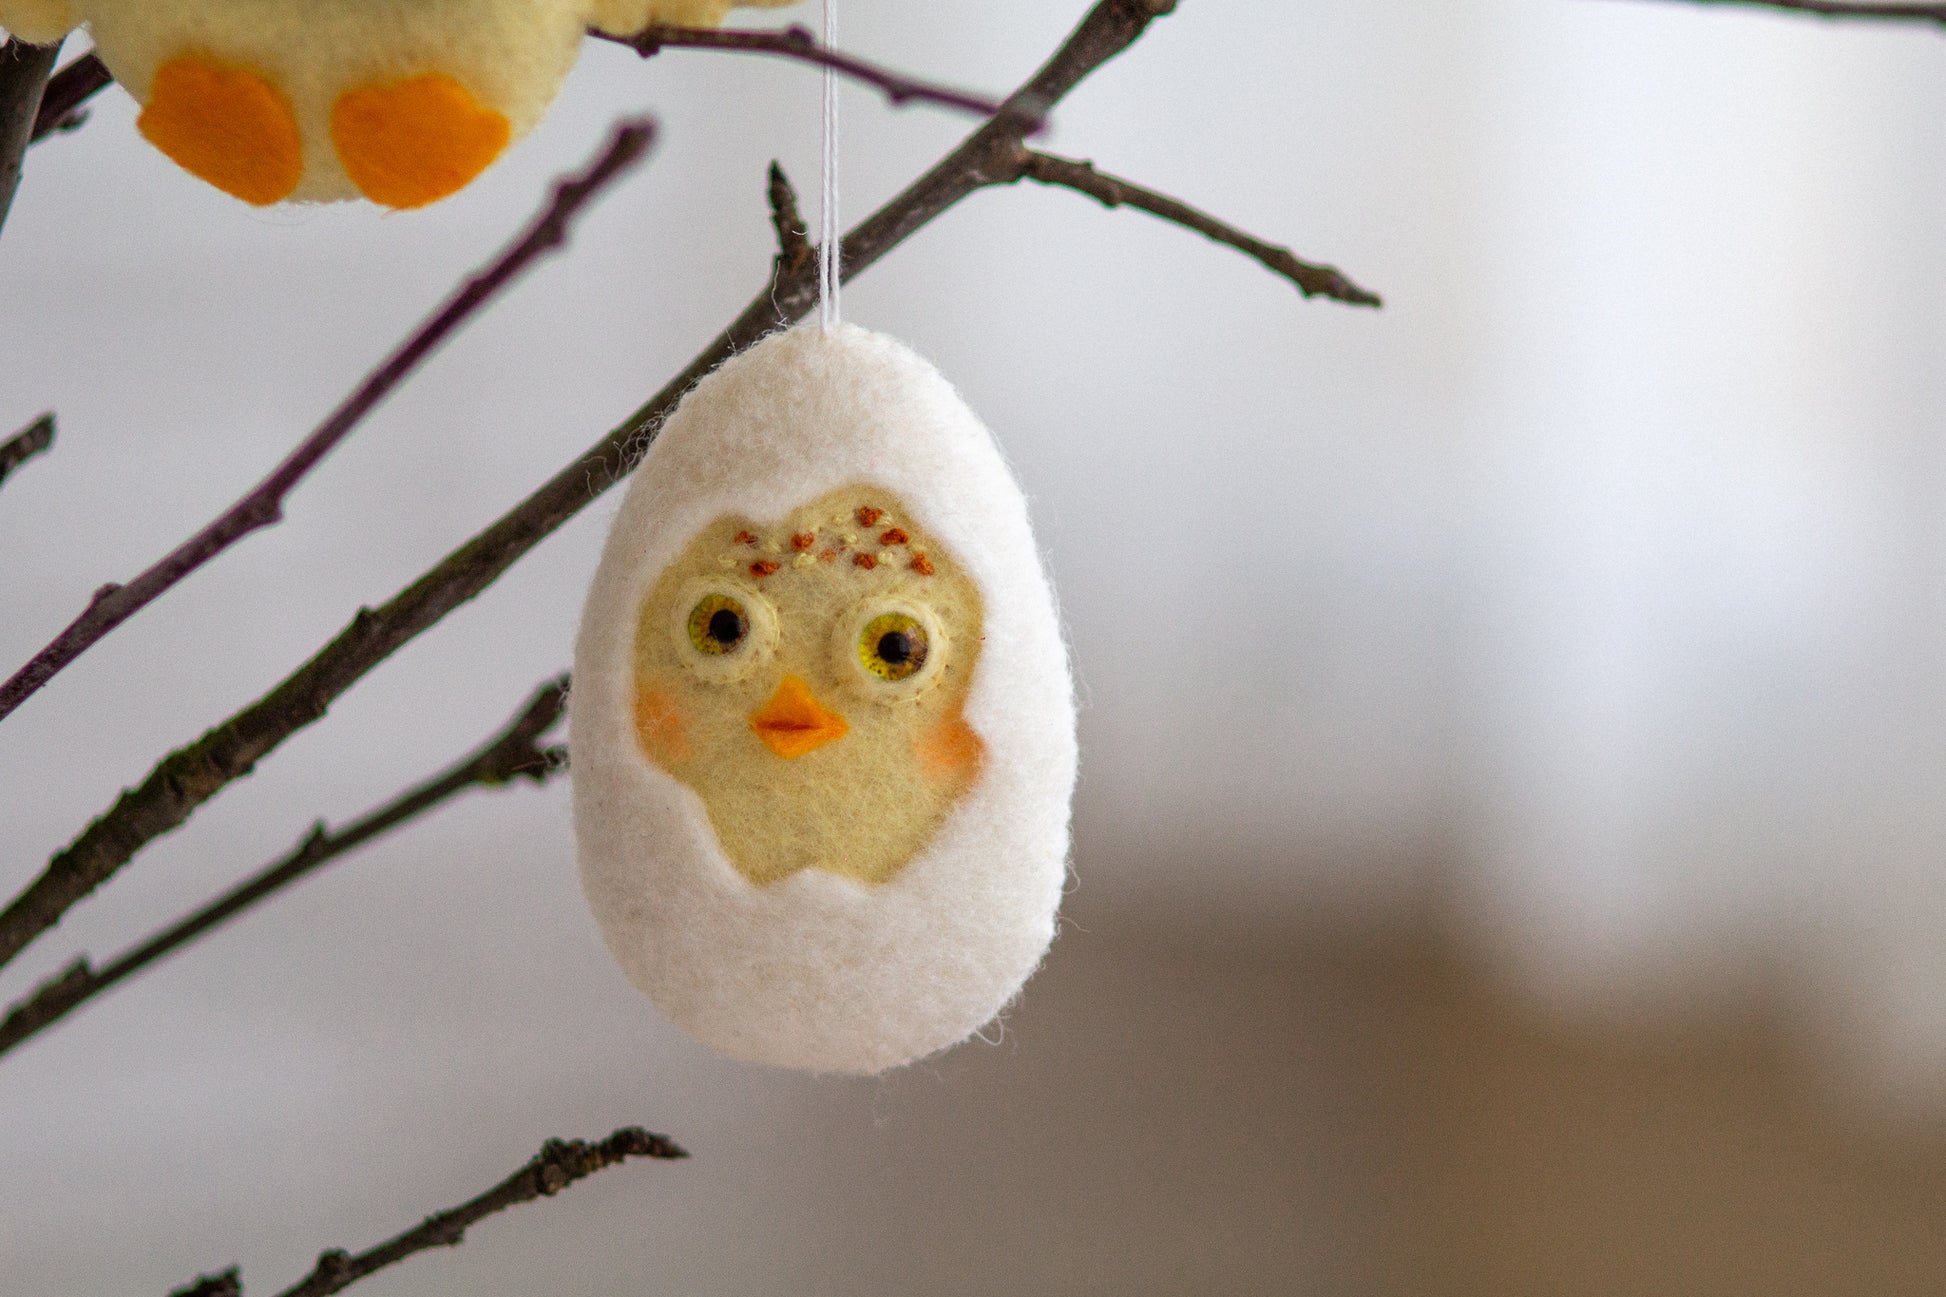 Egg Hatchling Ornament with Adorable Chicks and Fun Details